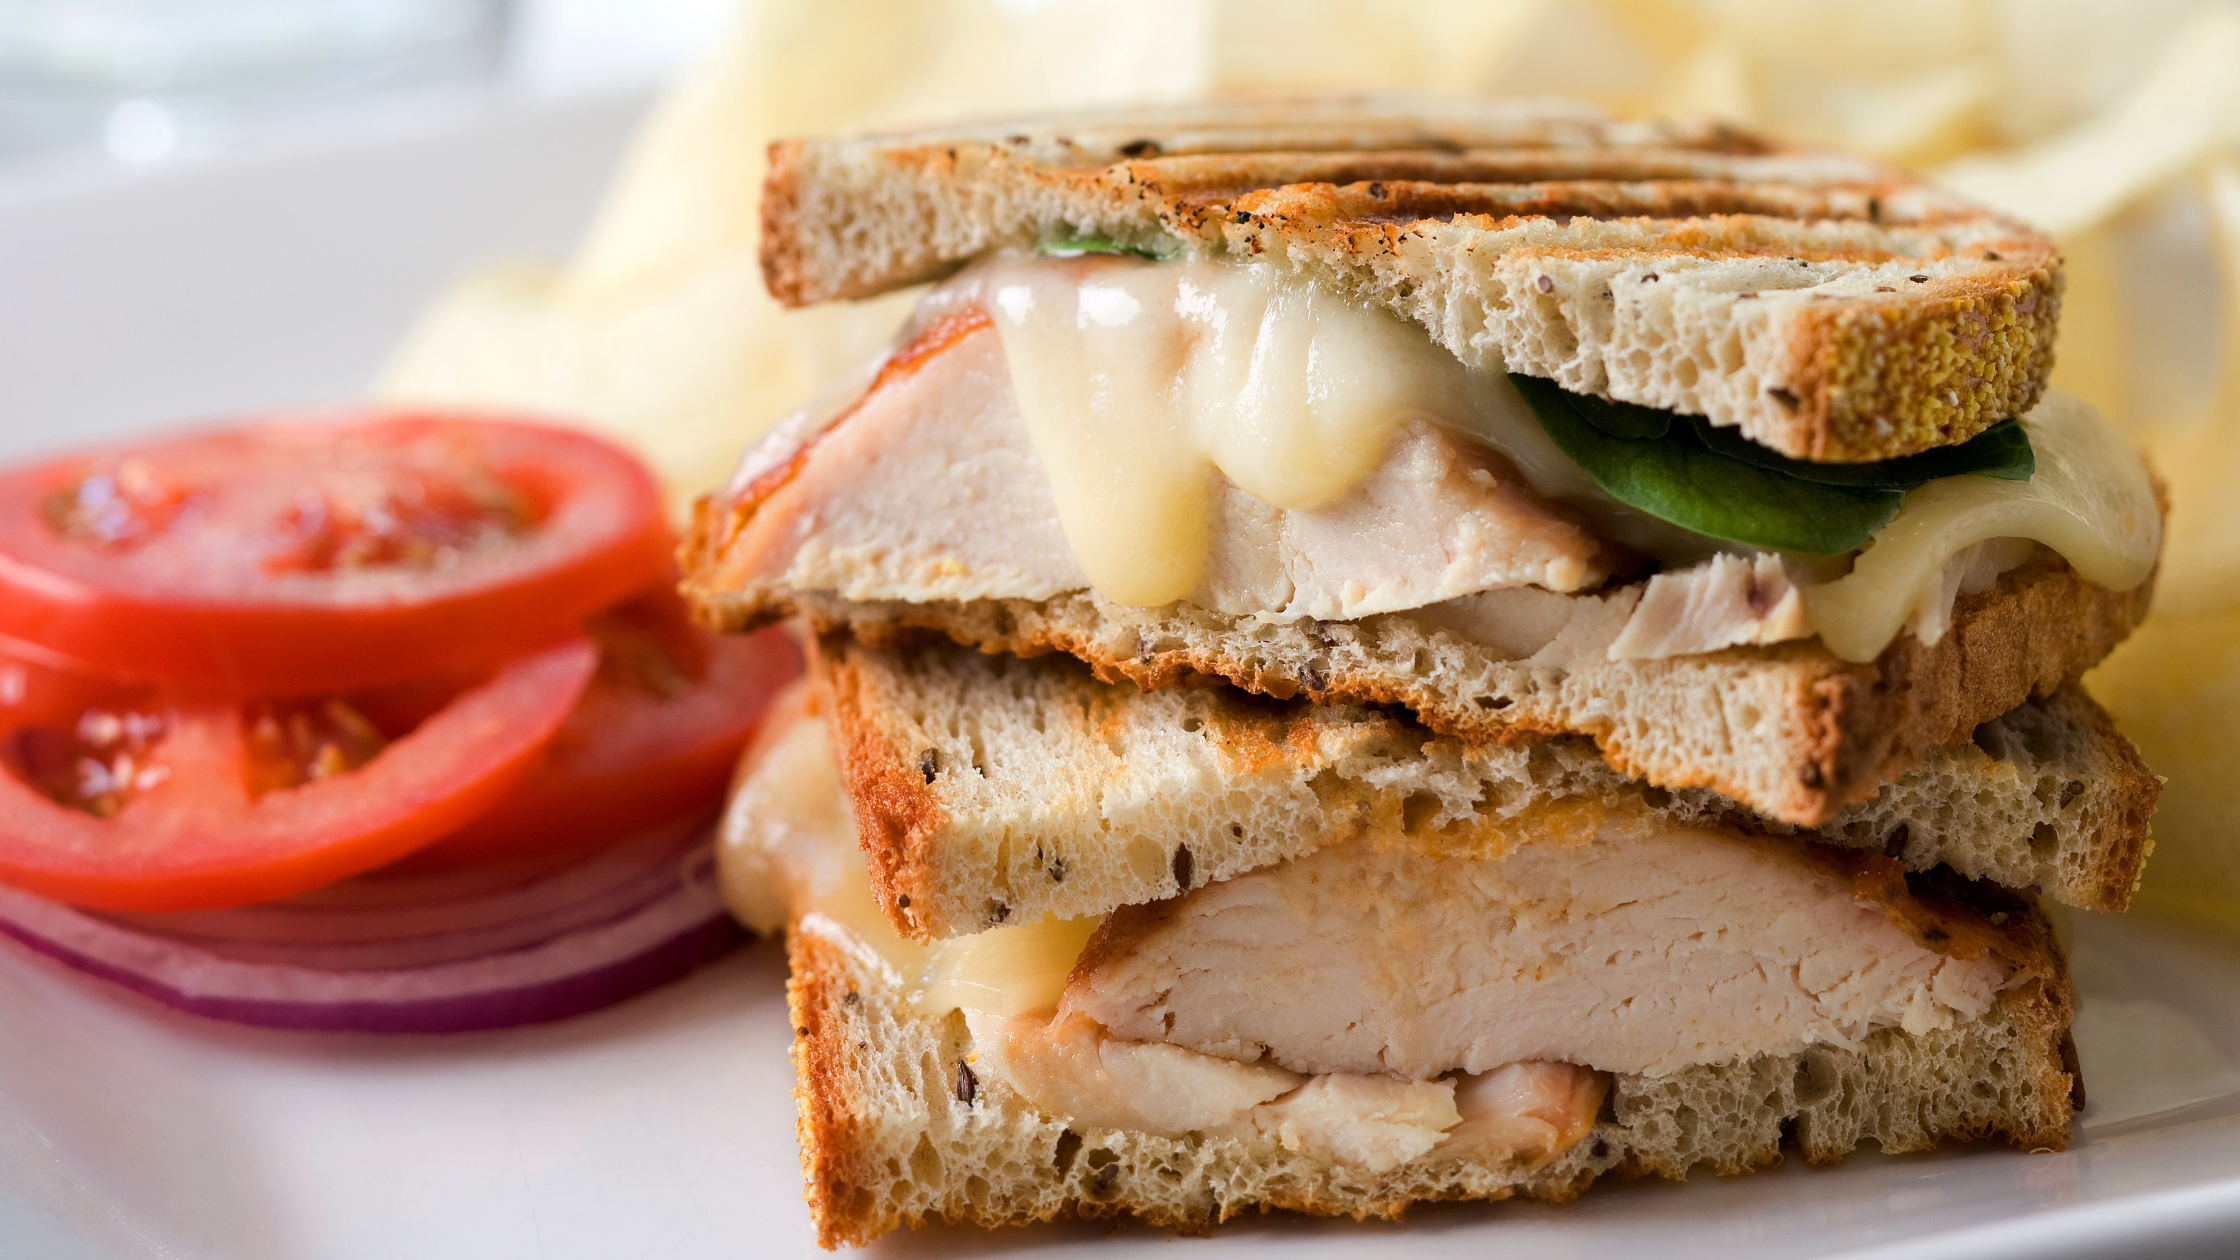 Flavorful Grilled Chicken & Brie Panini 4